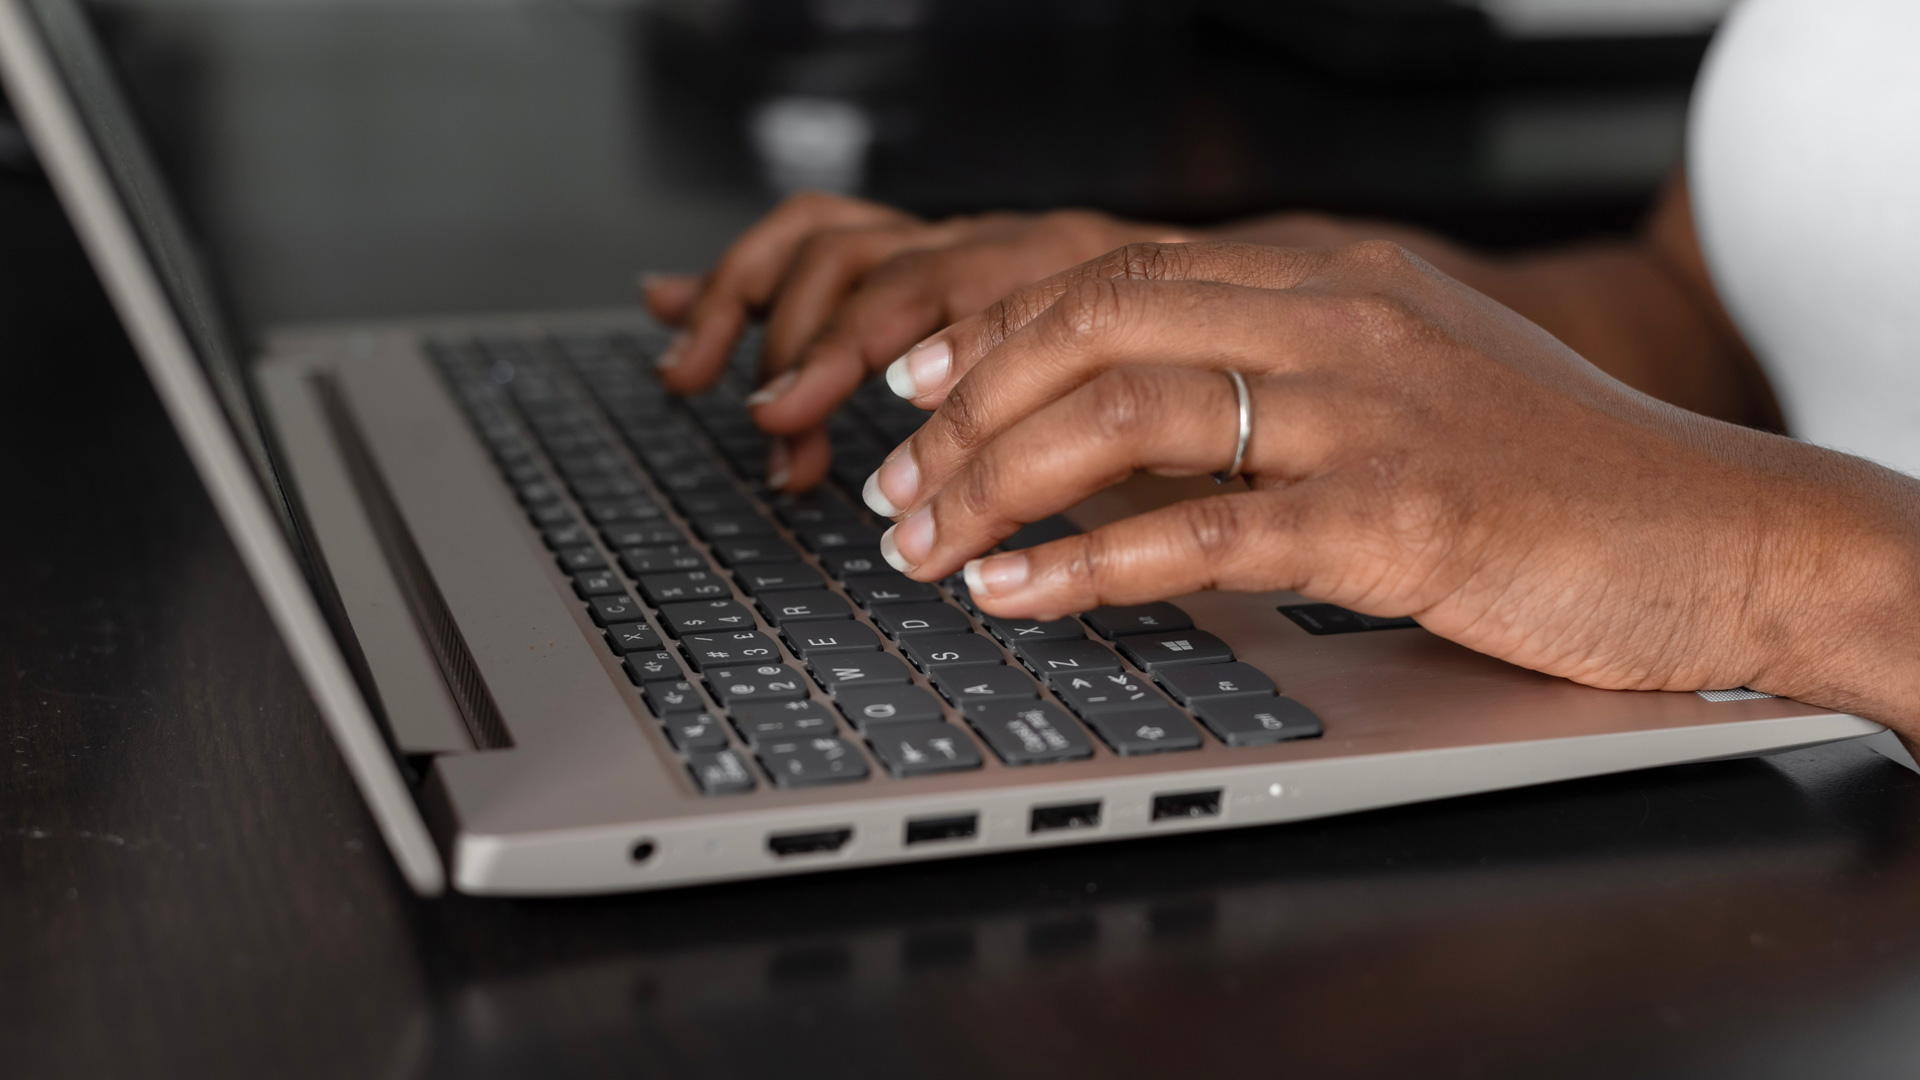 Hands typing on a MacBook keyboard